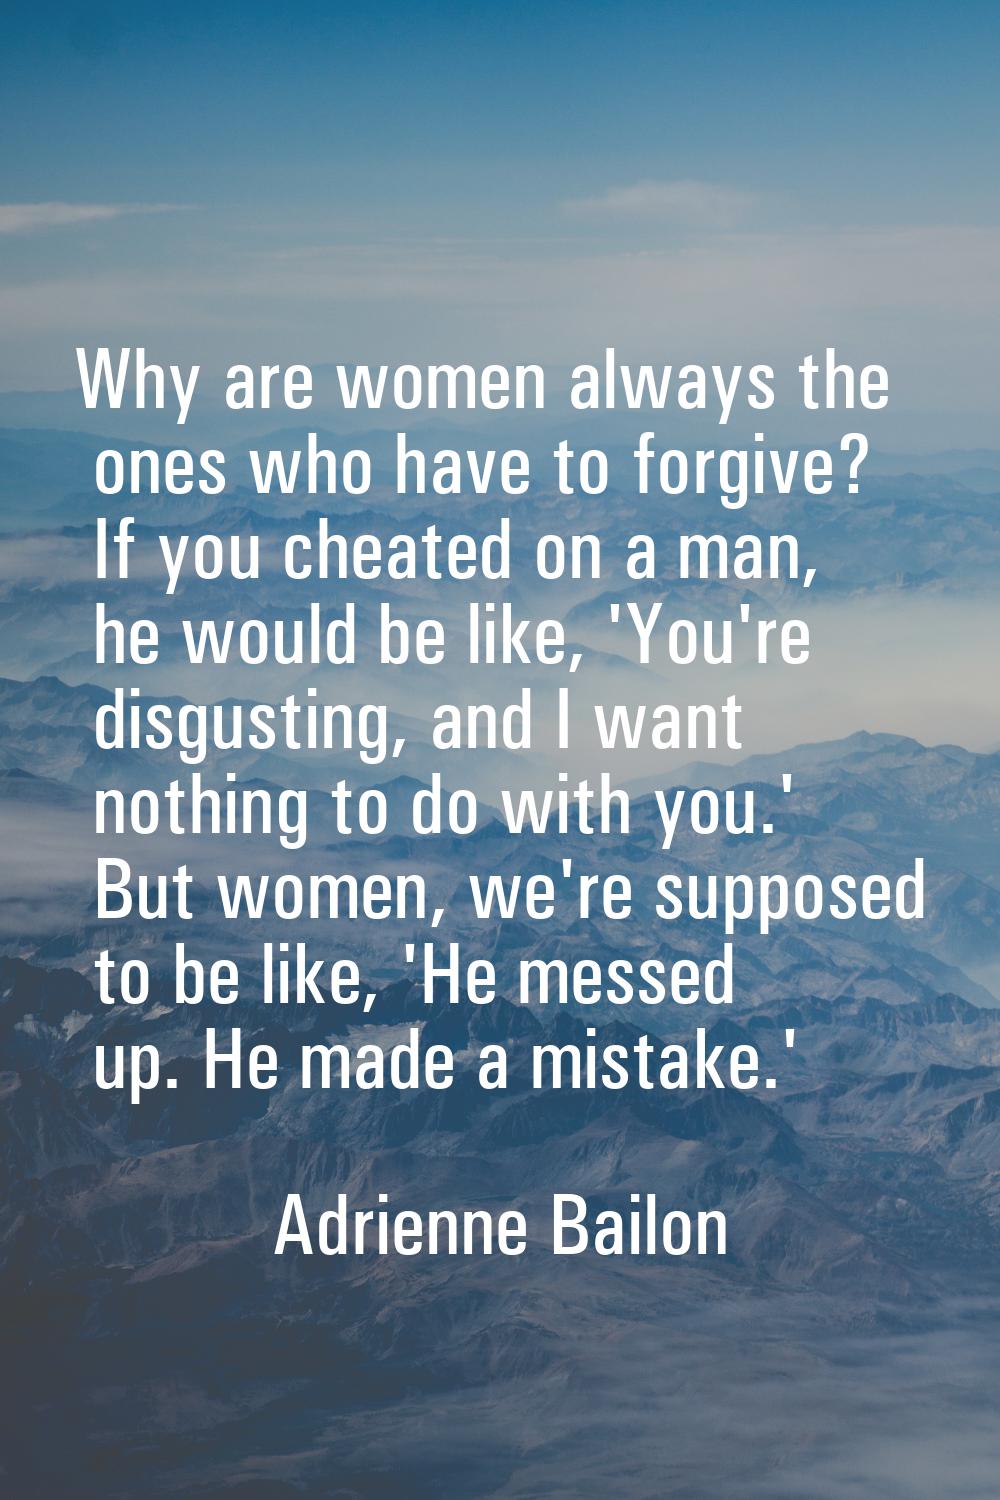 Why are women always the ones who have to forgive? If you cheated on a man, he would be like, 'You'